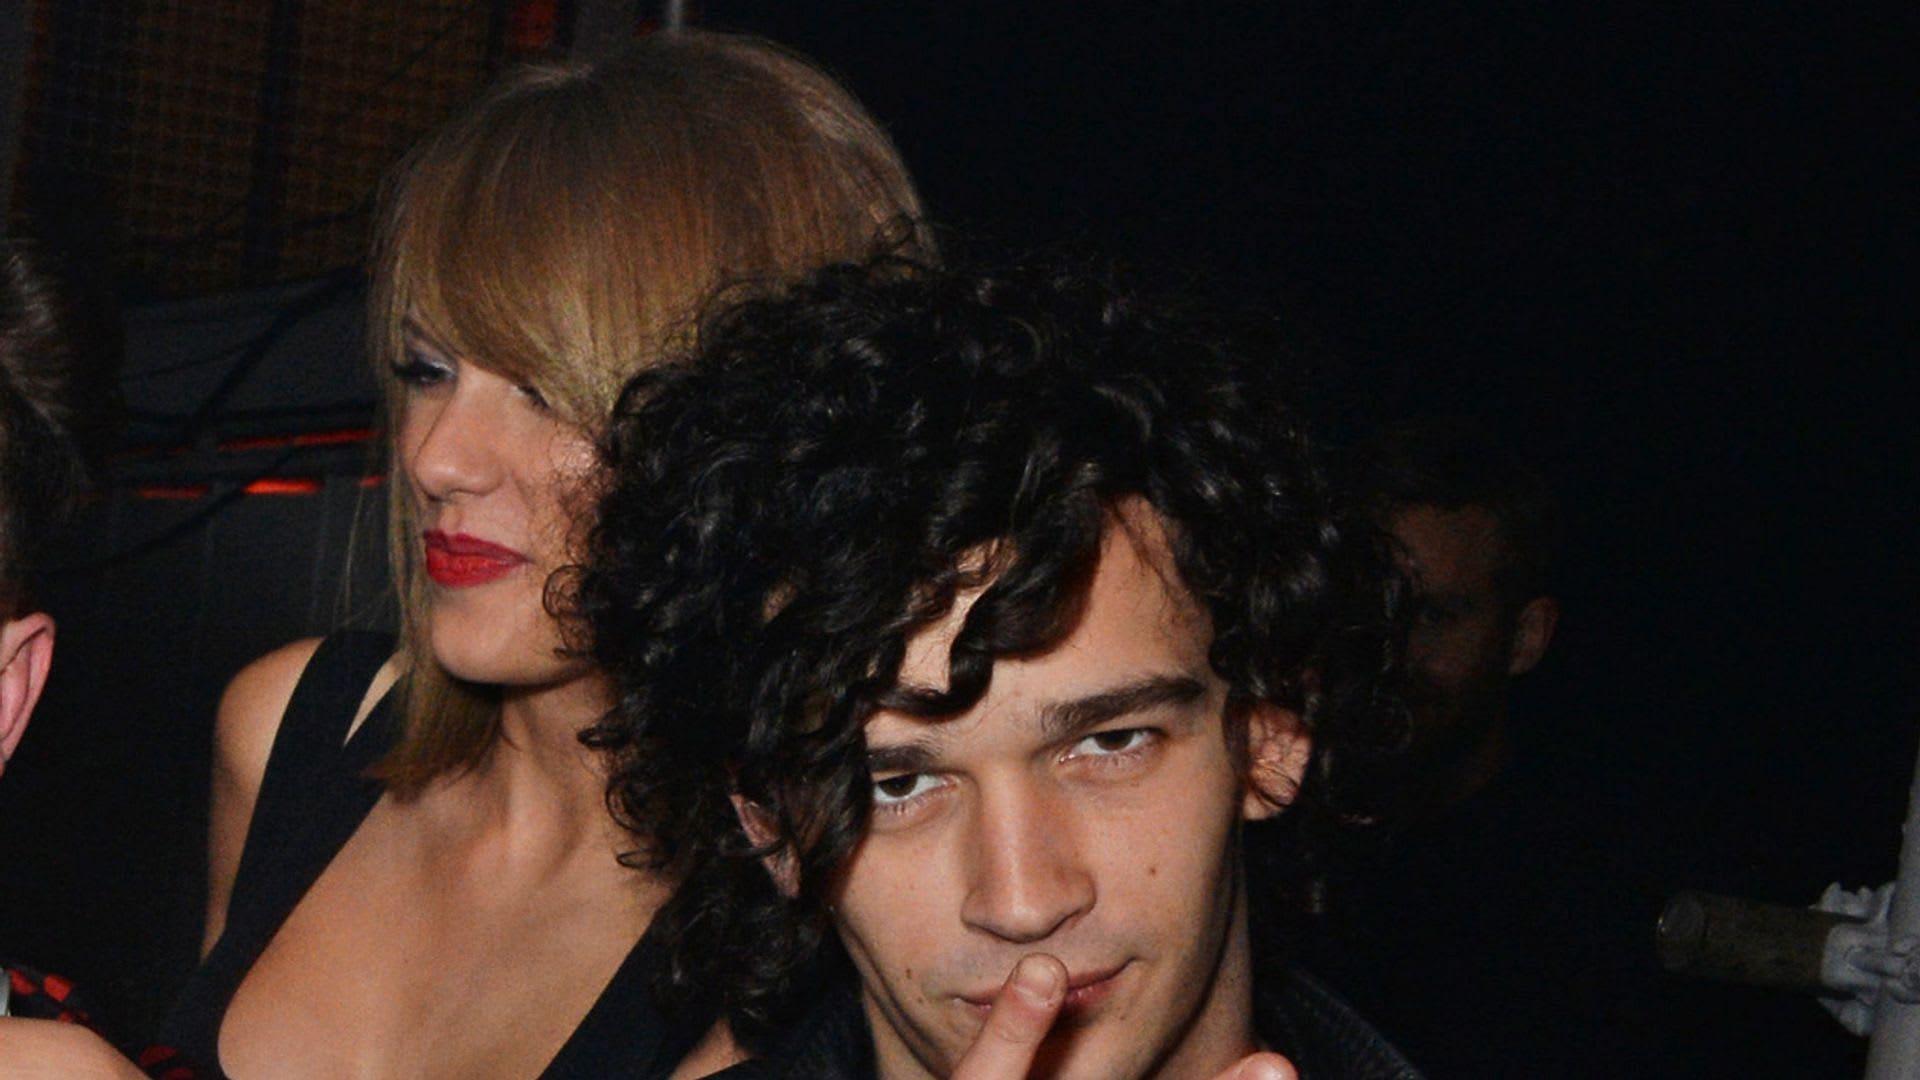 Social media users reacted to the news of the source claiming that Taylor and Matty are in a relationship. (Image via Getty Images)